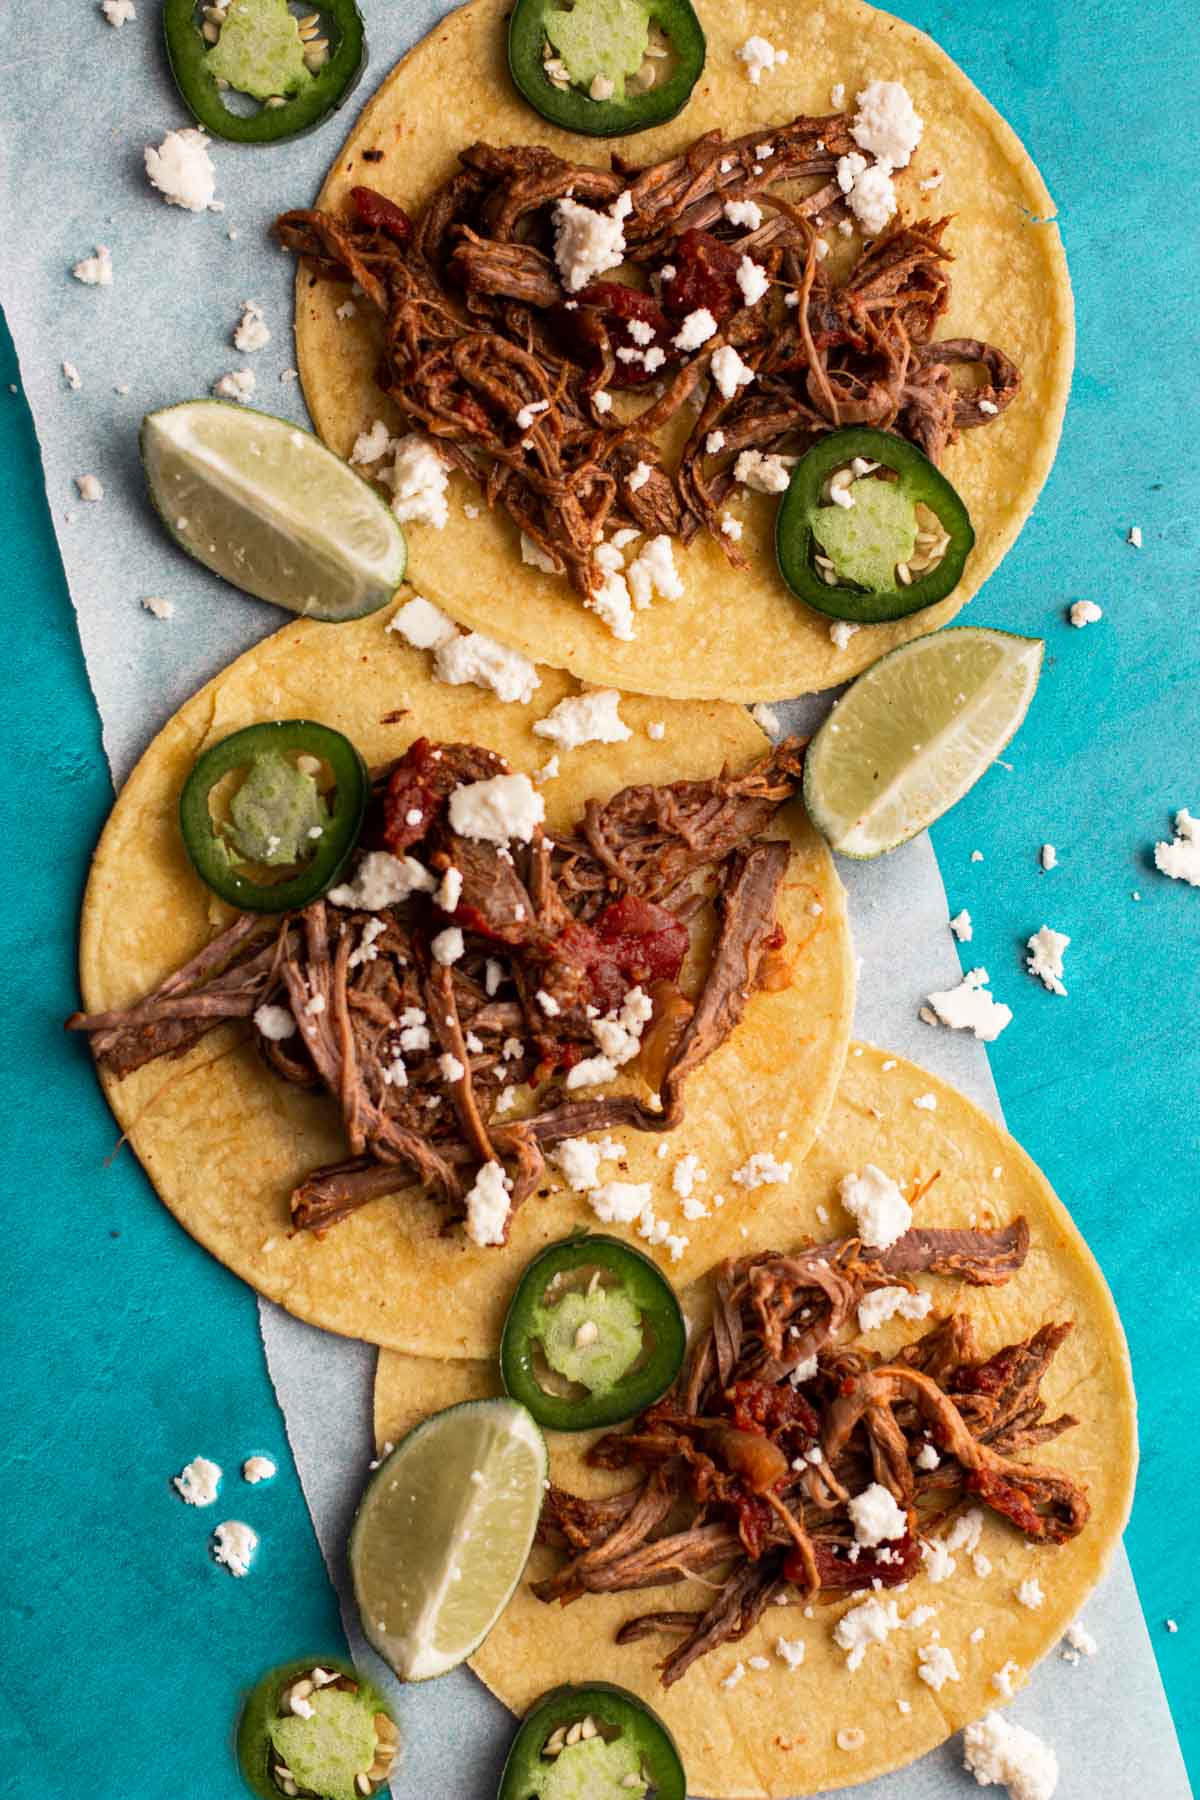 3 tri-tip tacos garnished with jalapeno peppers, lime wedges and cotija cheese.